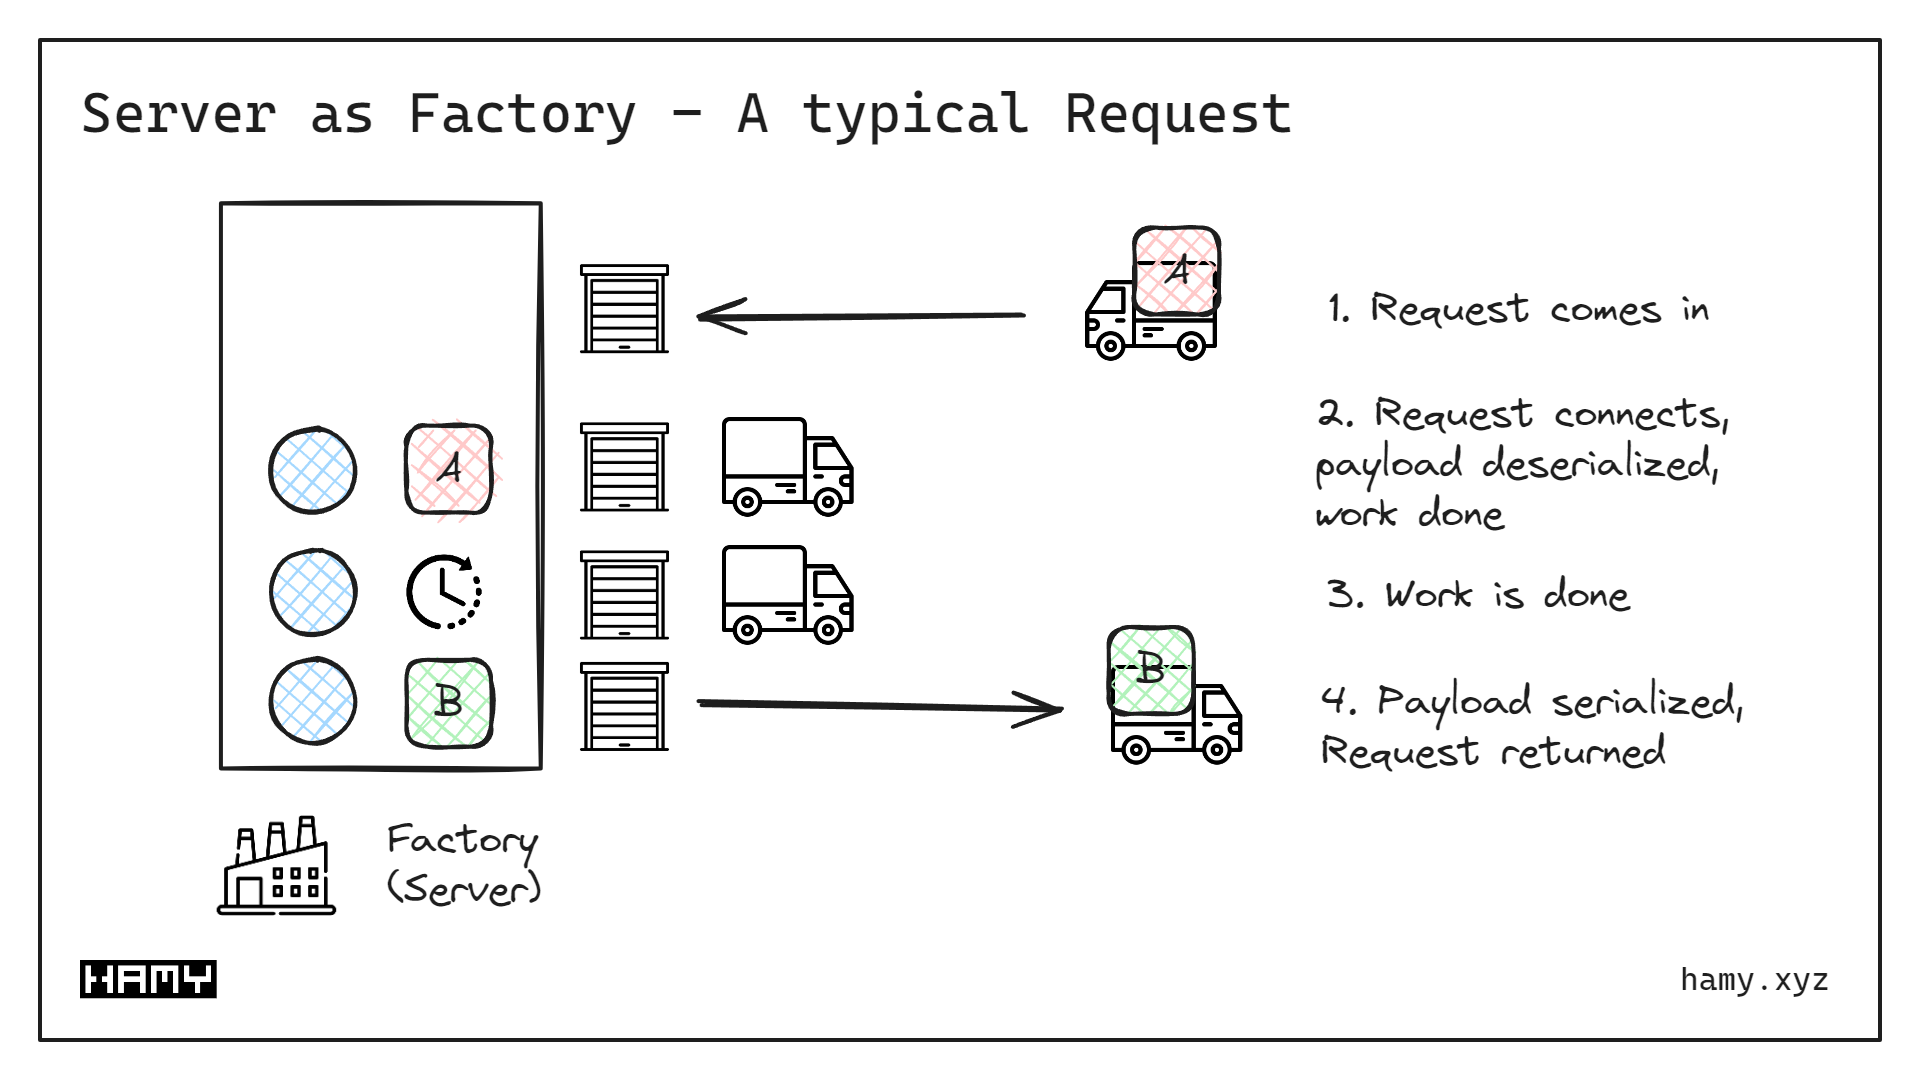 Server as Factory - Example Request